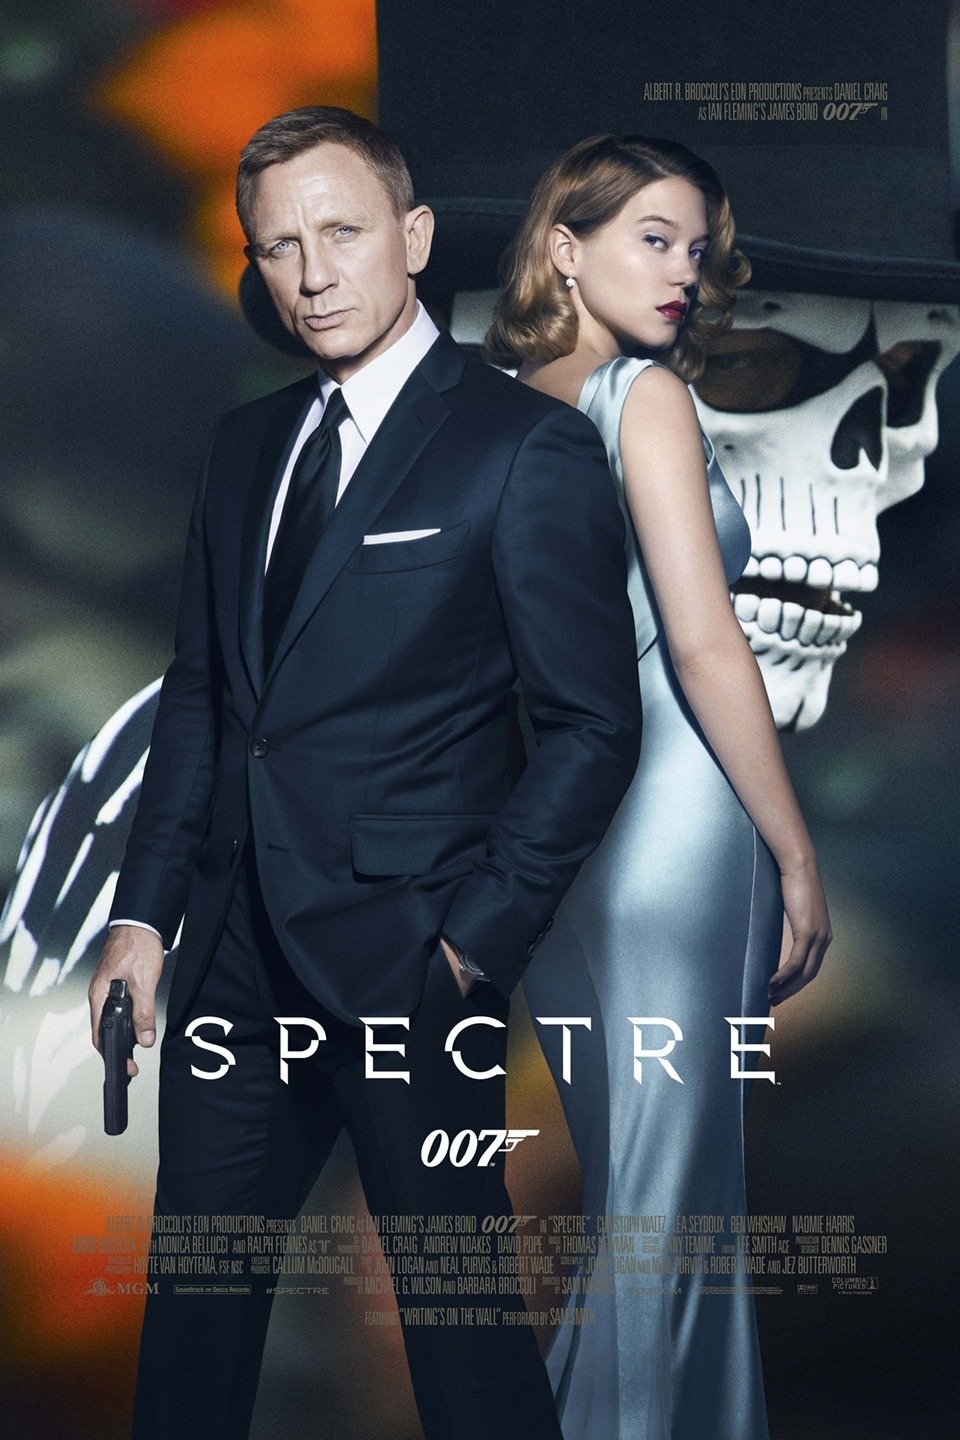 In/Spectre Review